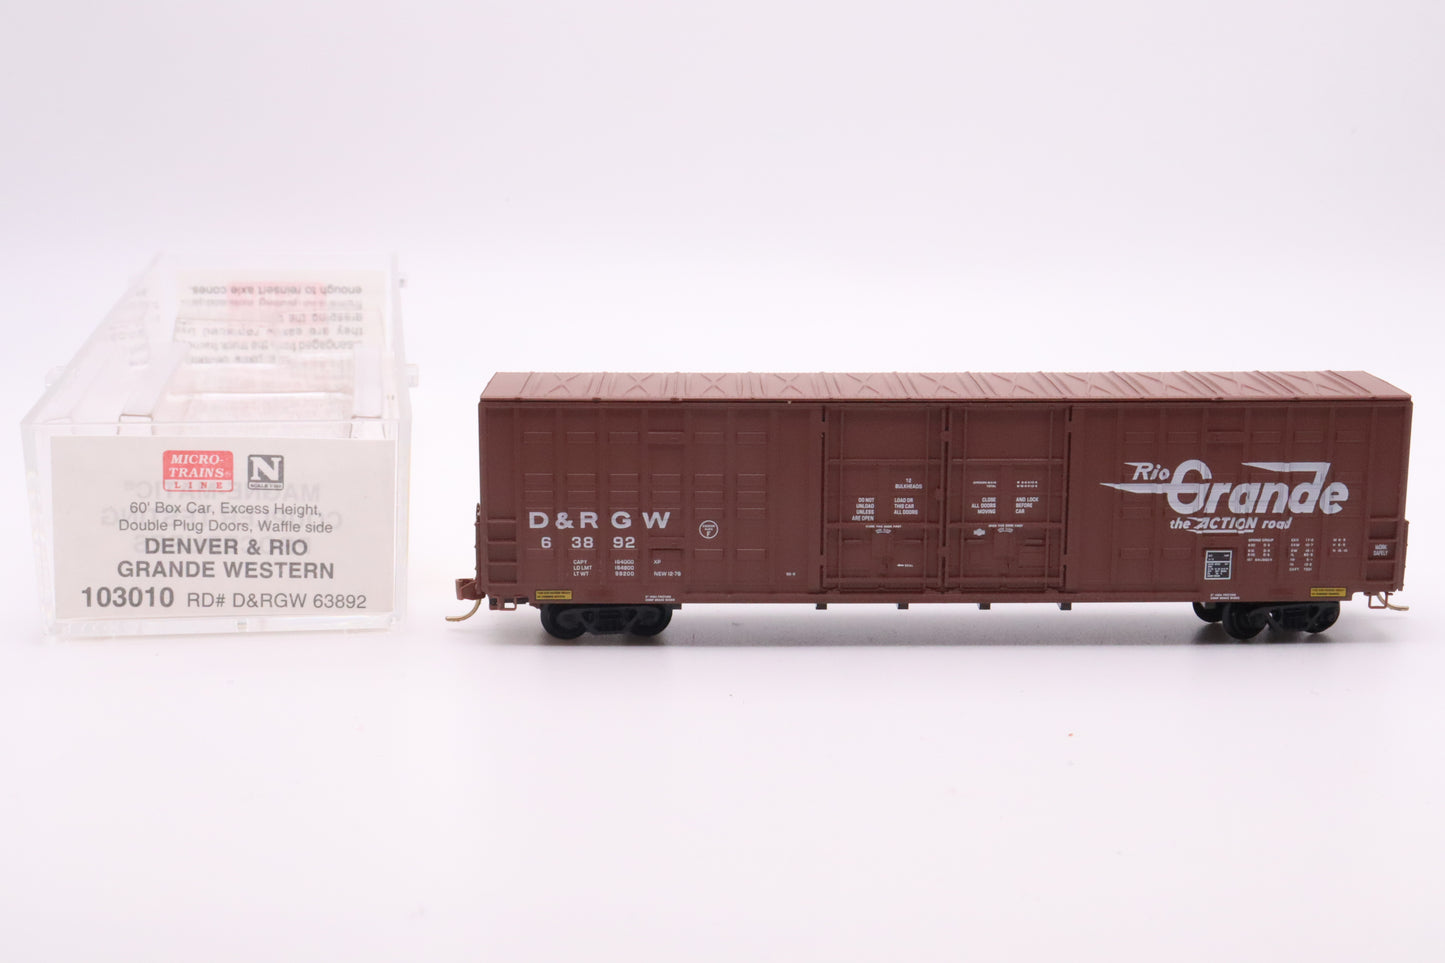 MTL-103010 - 60' Box Car, Excess Height, Double Plug Doors, Waffle Side - Denver & Rio Grande Western - D&RGW 63892